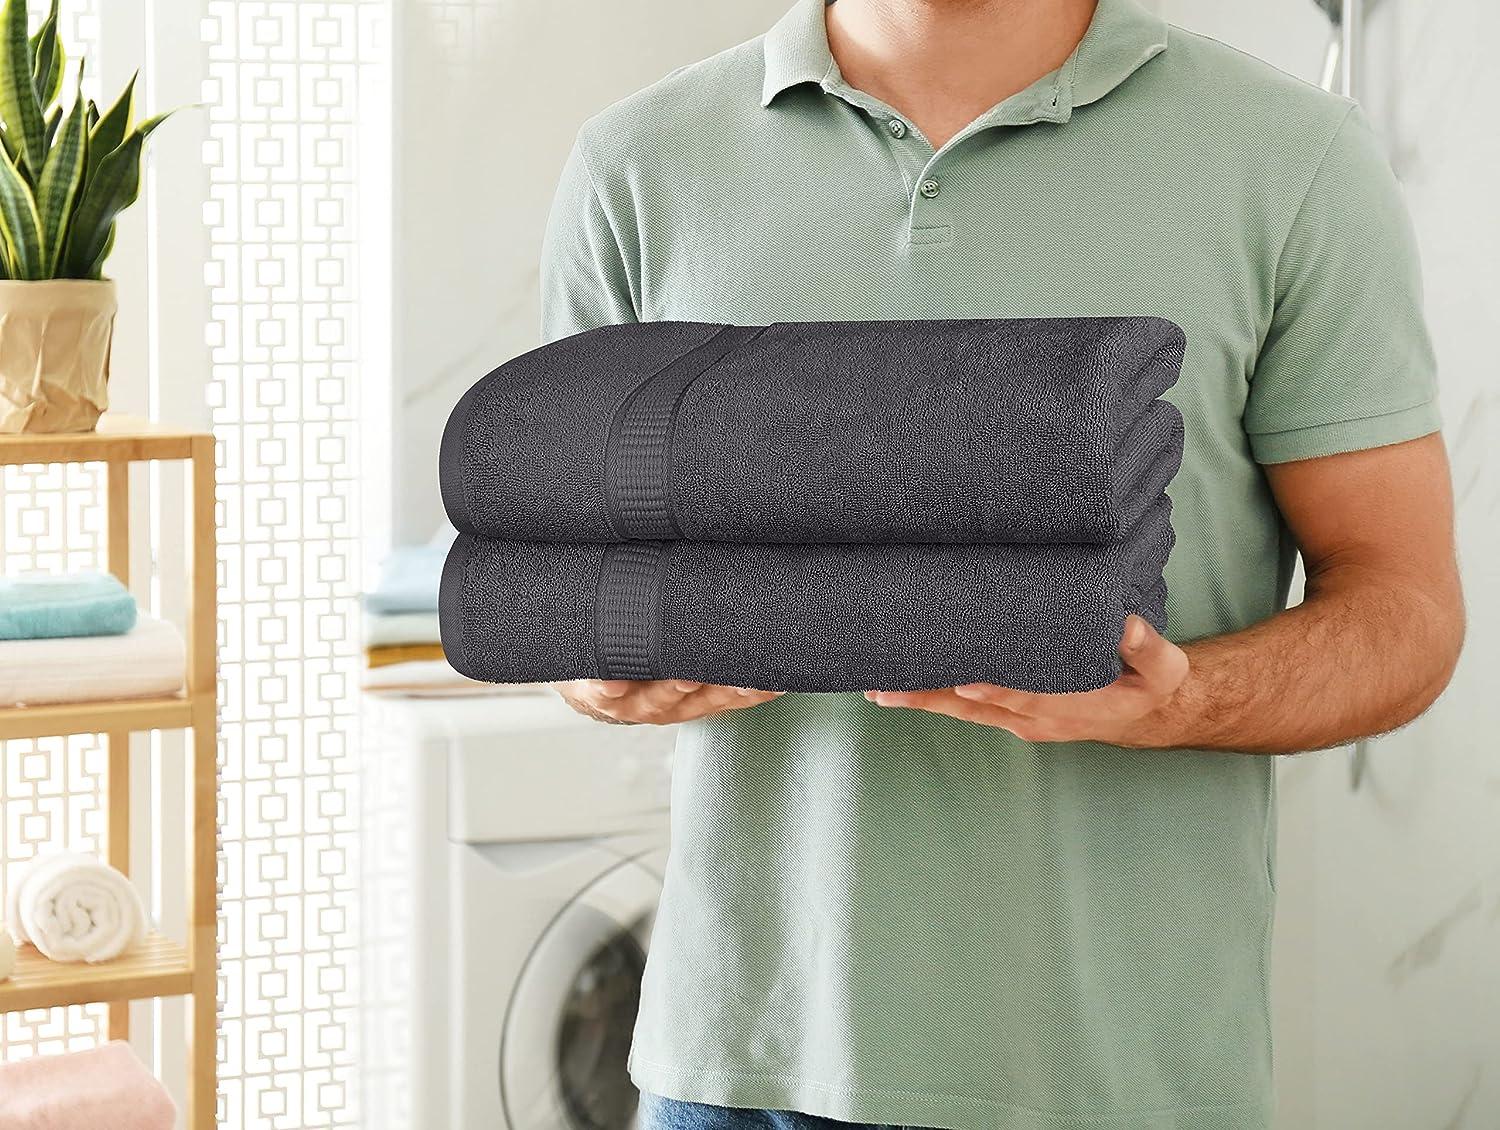 Utopia Towels - Luxurious Jumbo Bath Sheet (35 x 70 Inches, Grey) - 600 GSM 100% Ring Spun Cotton Highly Absorbent and Quick